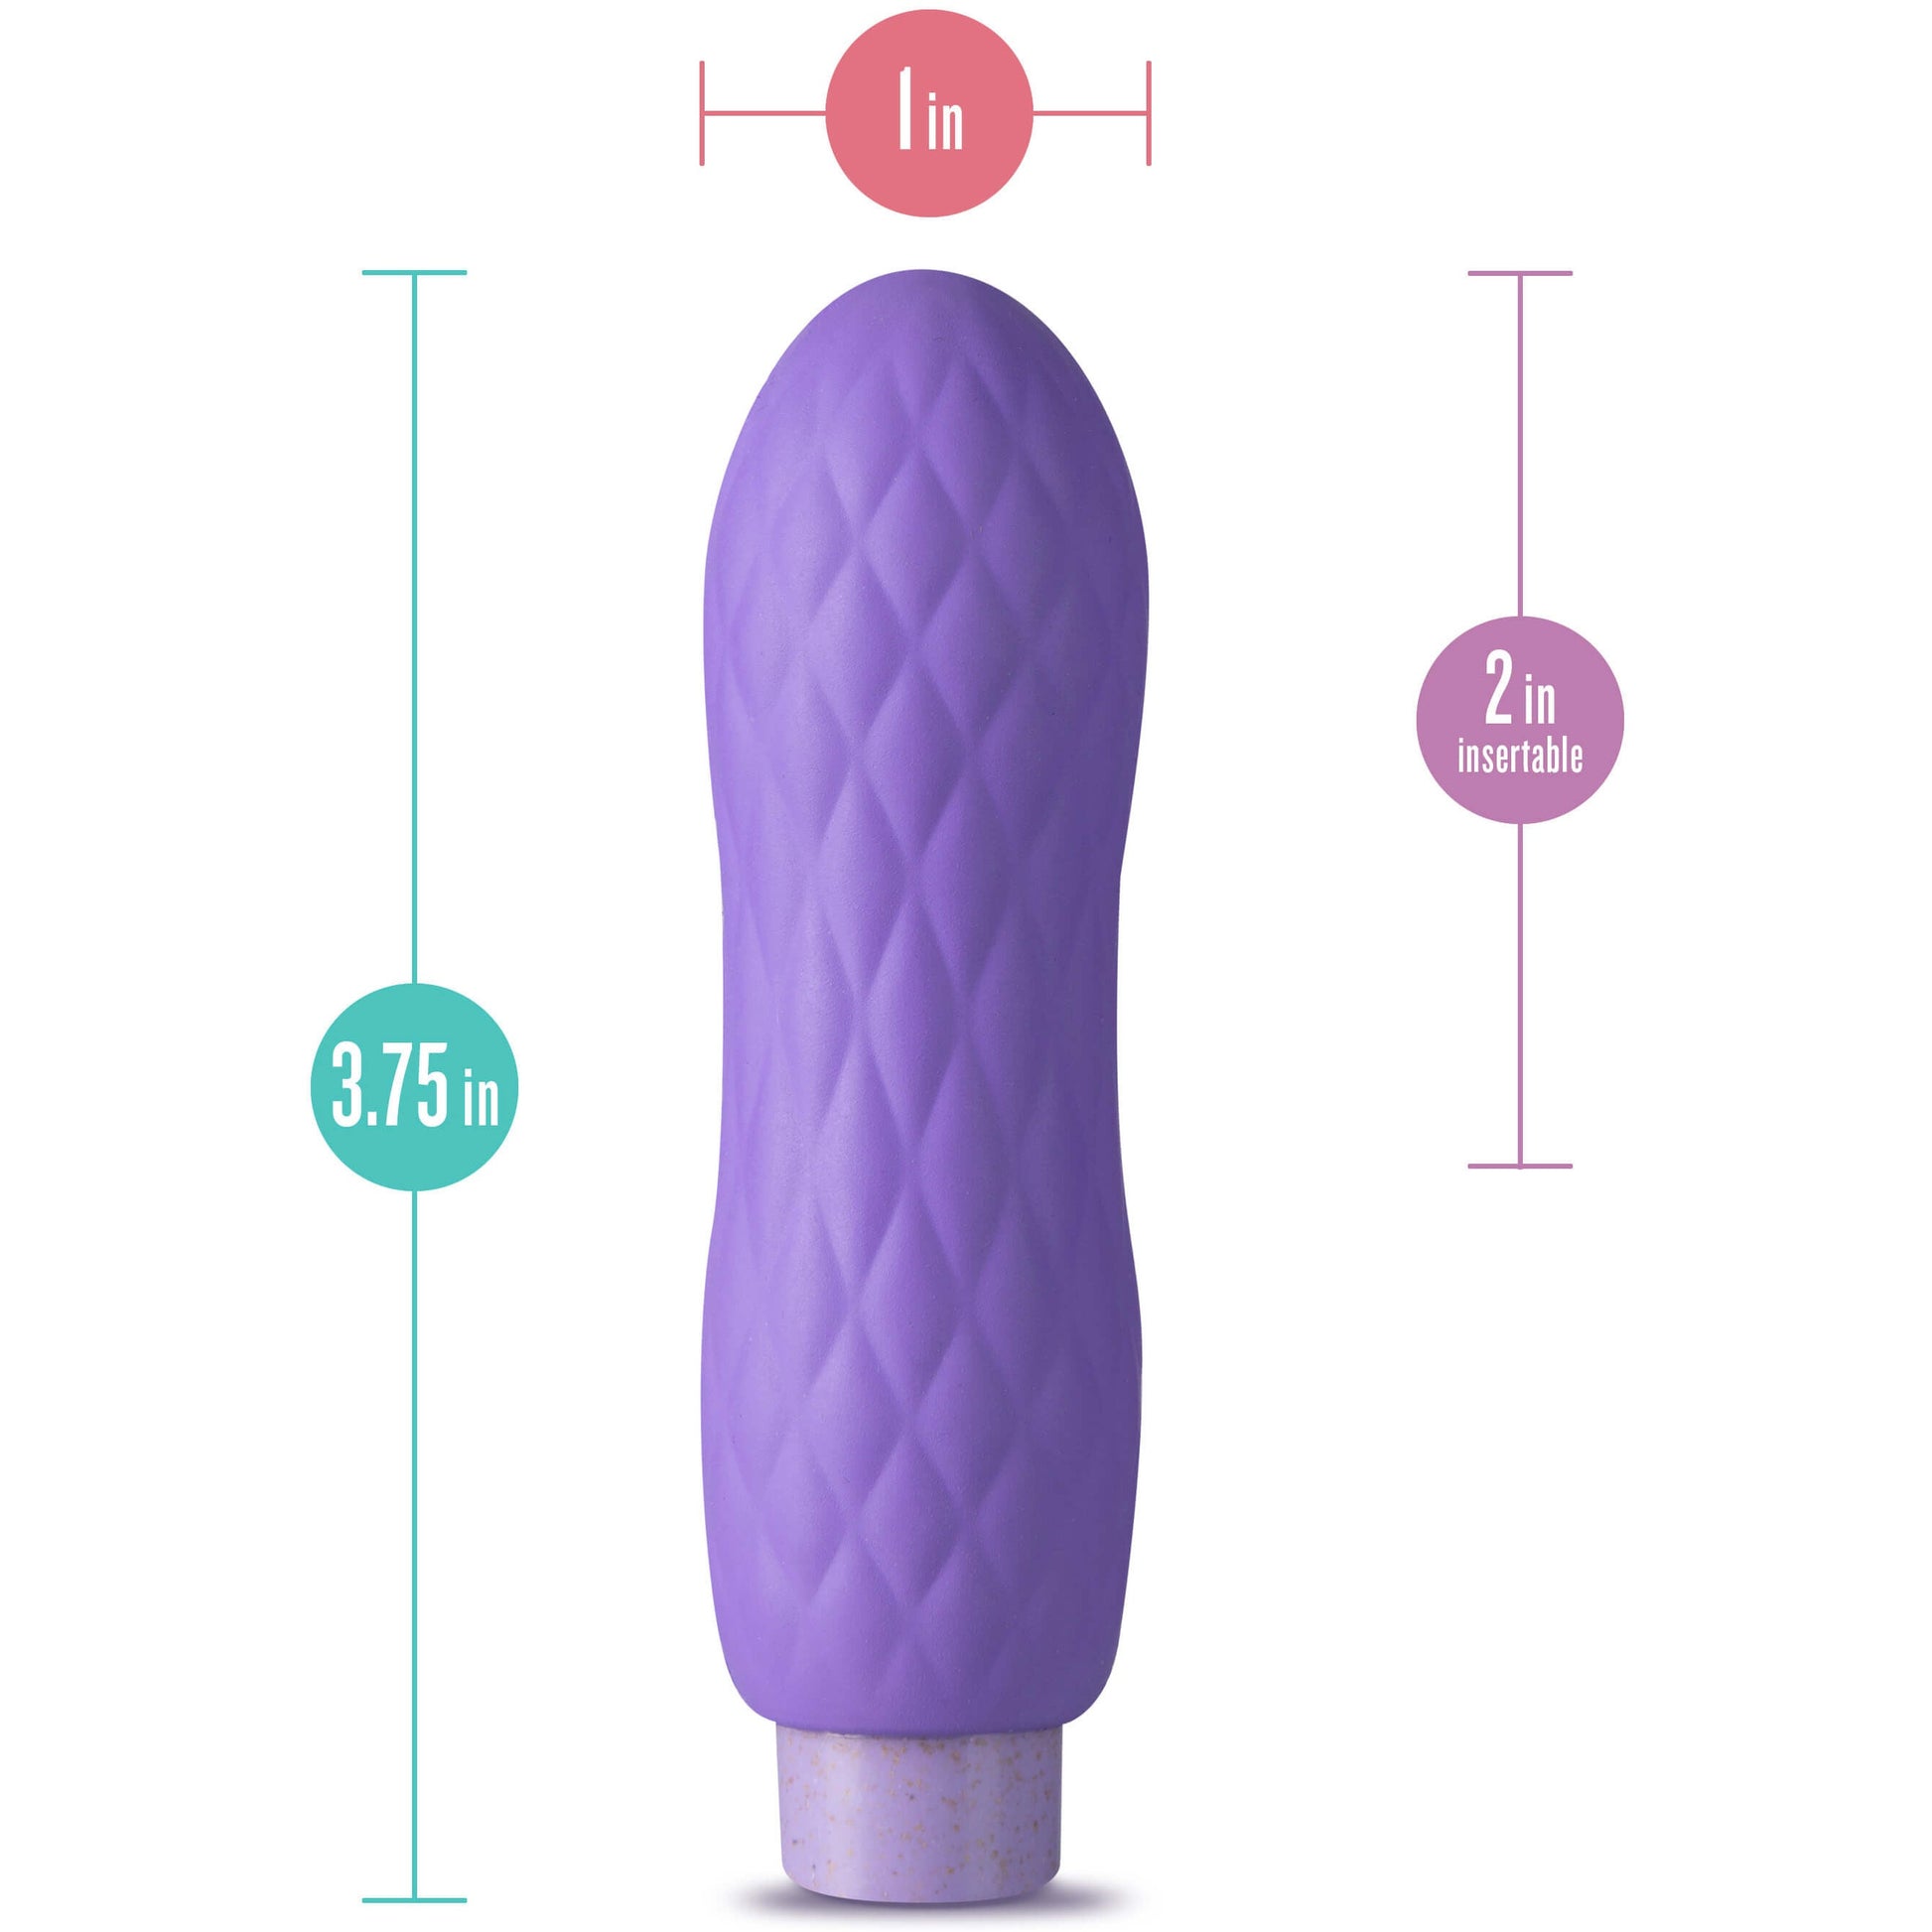 Blush Gaia Eco Bliss measurements - by The Bigger O online sex toy shop. USA, Canada and UK shipping available.